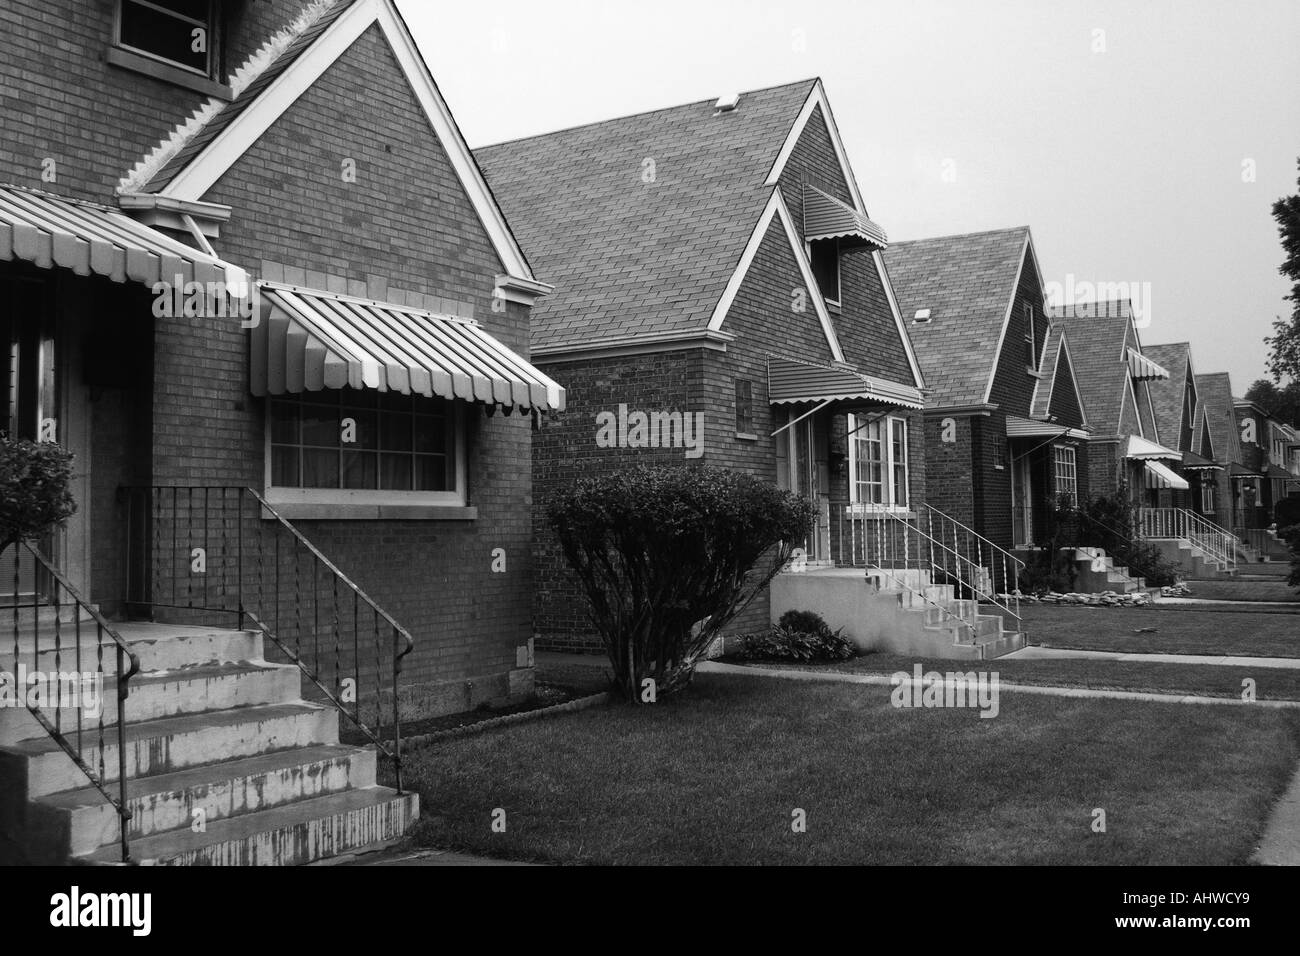 This is a black and white image of a row of single family houses They are located on the south side of Chicago They are brick Stock Photo